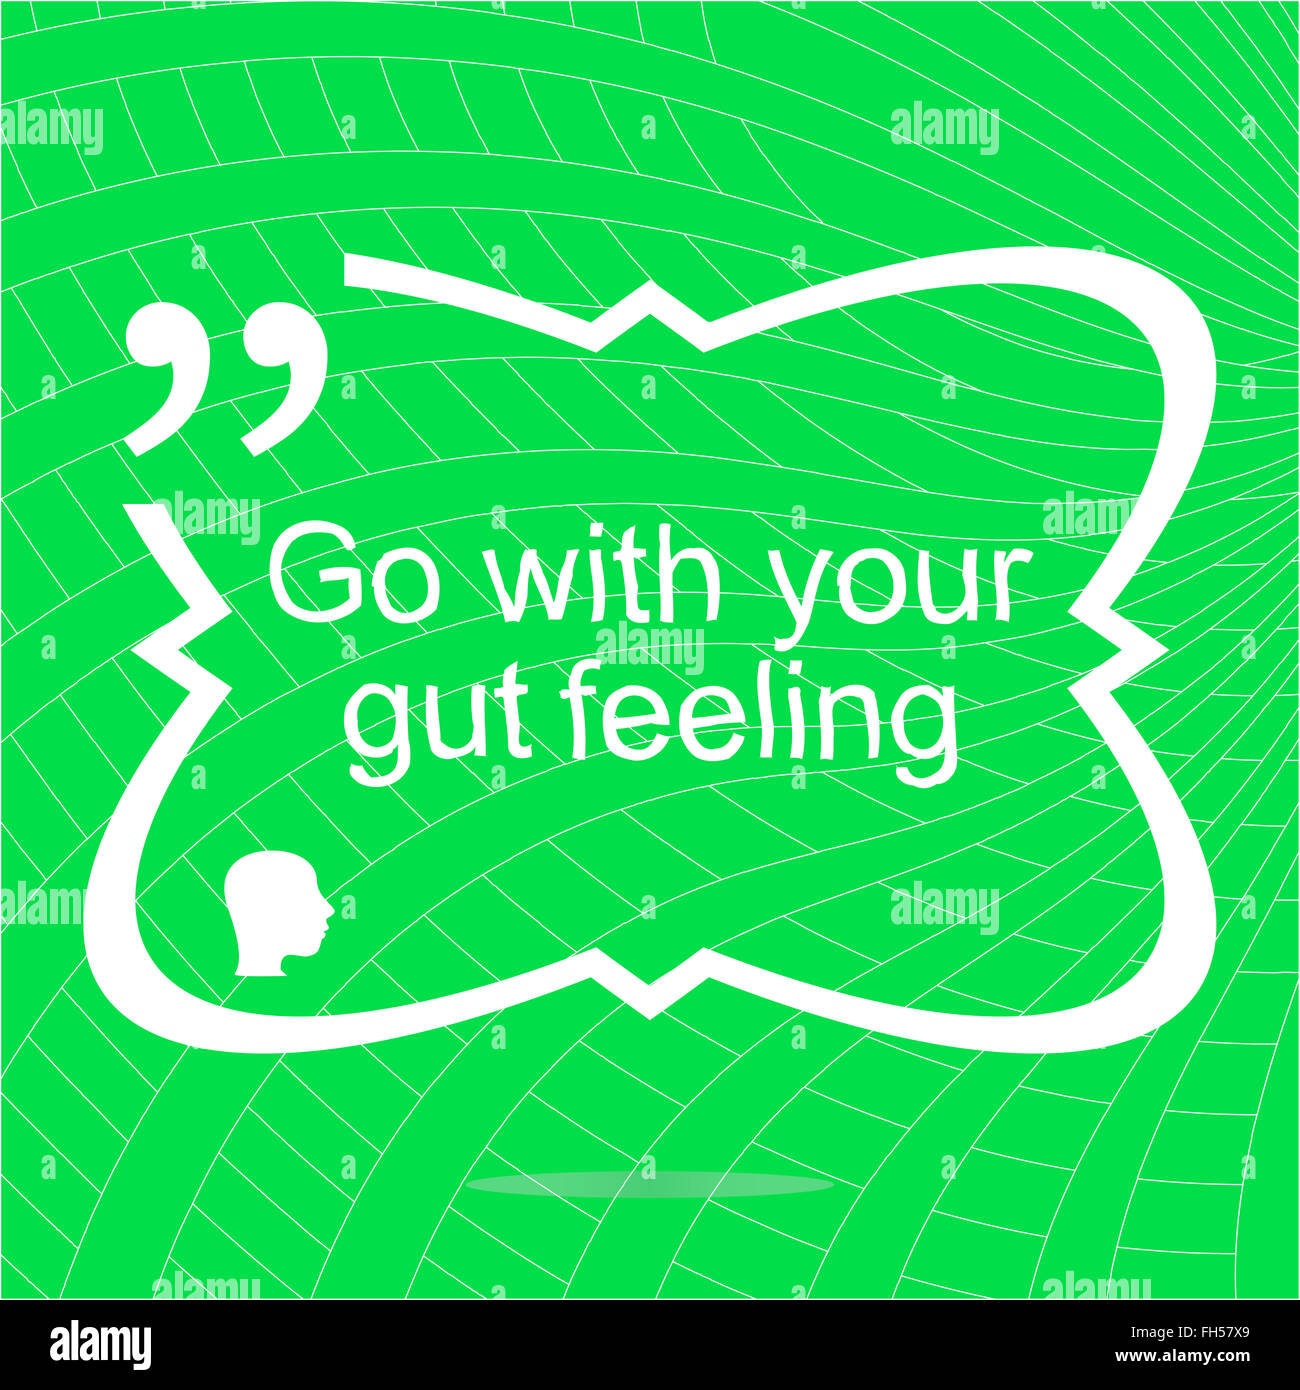 Go with your gut feeling. Inspirational motivational quote. Simple trendy design. Positive quote. Vector illustration Stock Photo